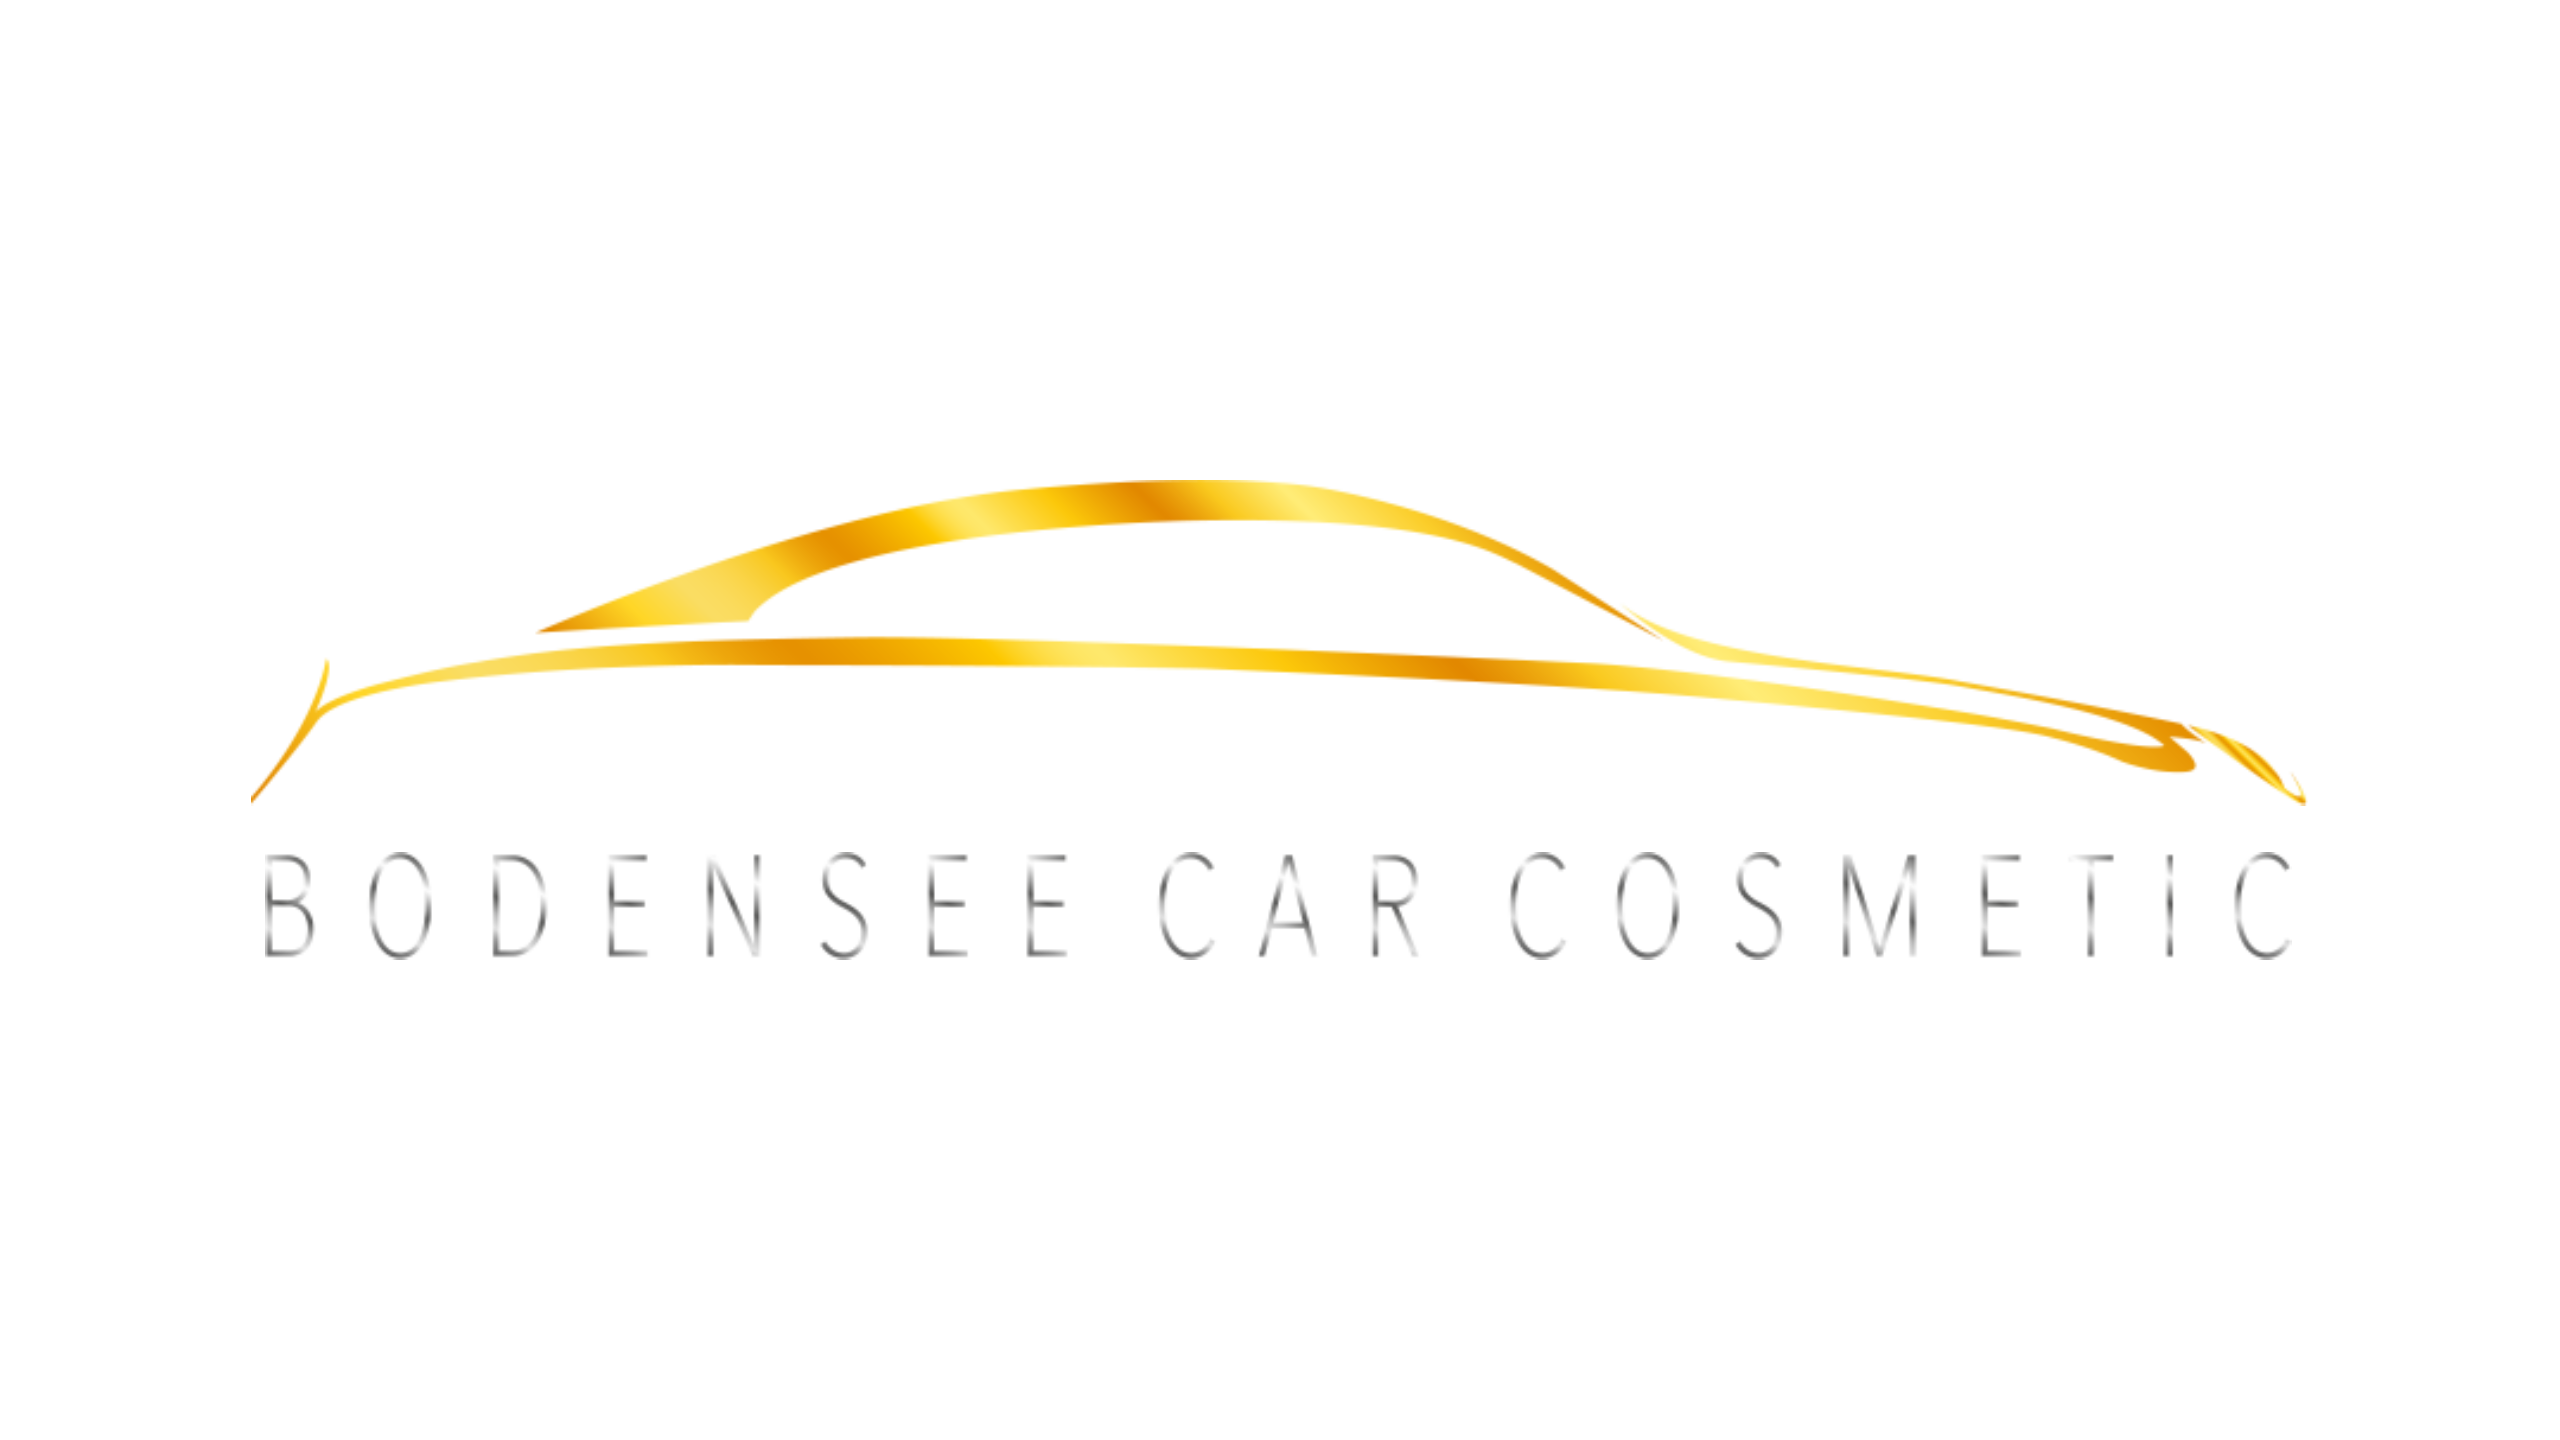 Bodensee Car Cosmetic Logo